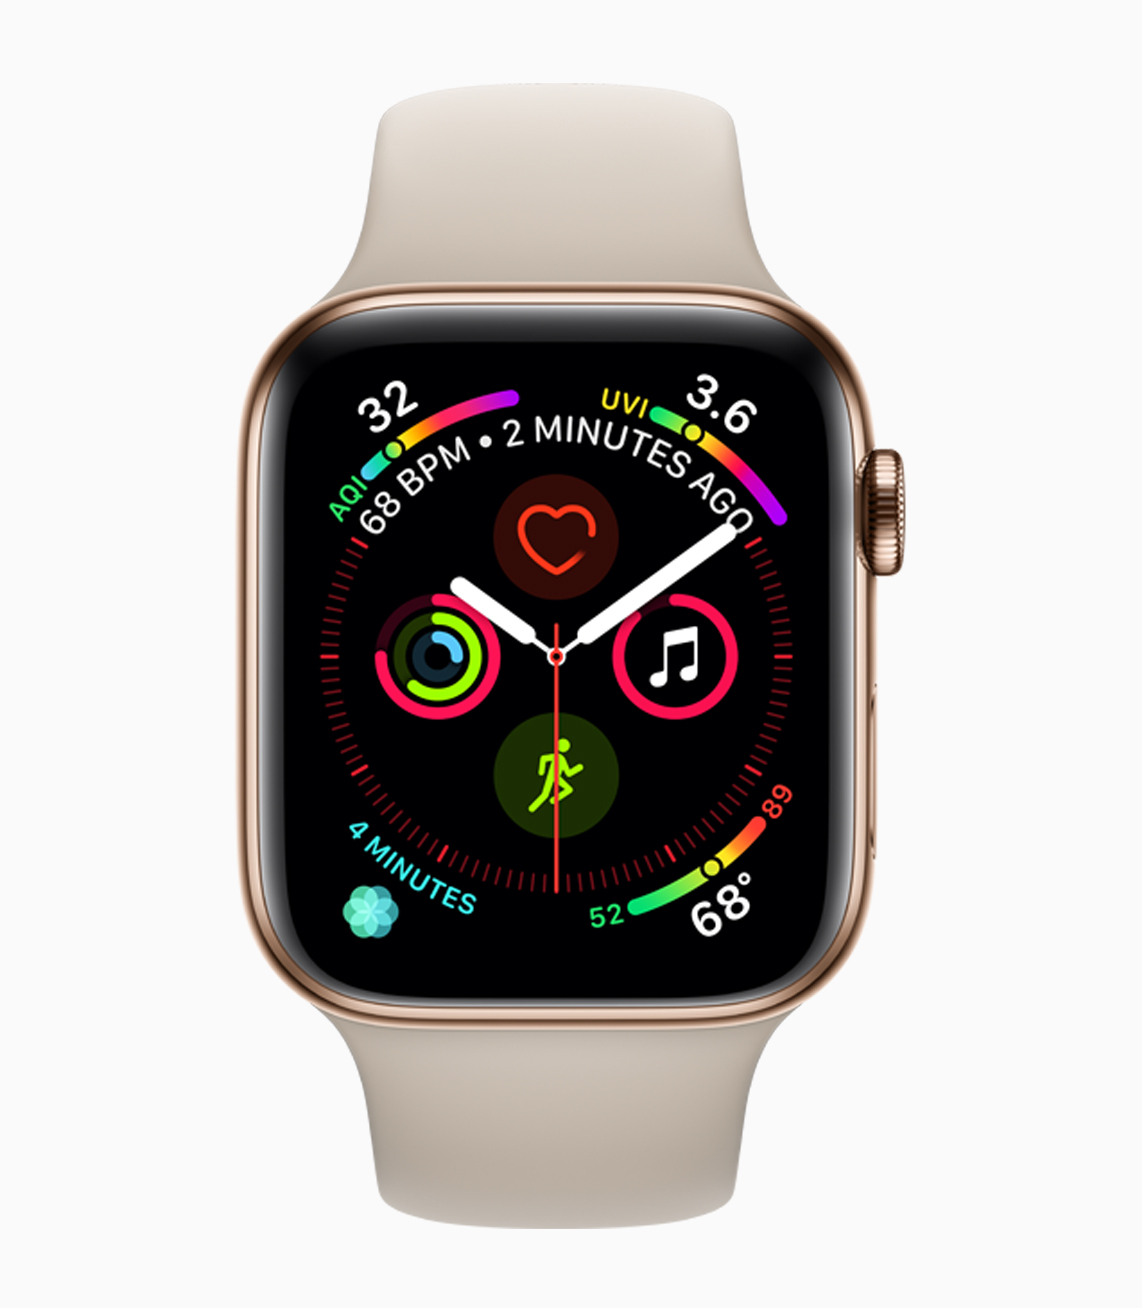 Apple Unveils Apple Watch Series 4 With Larger Display, Thinner Body, ECG